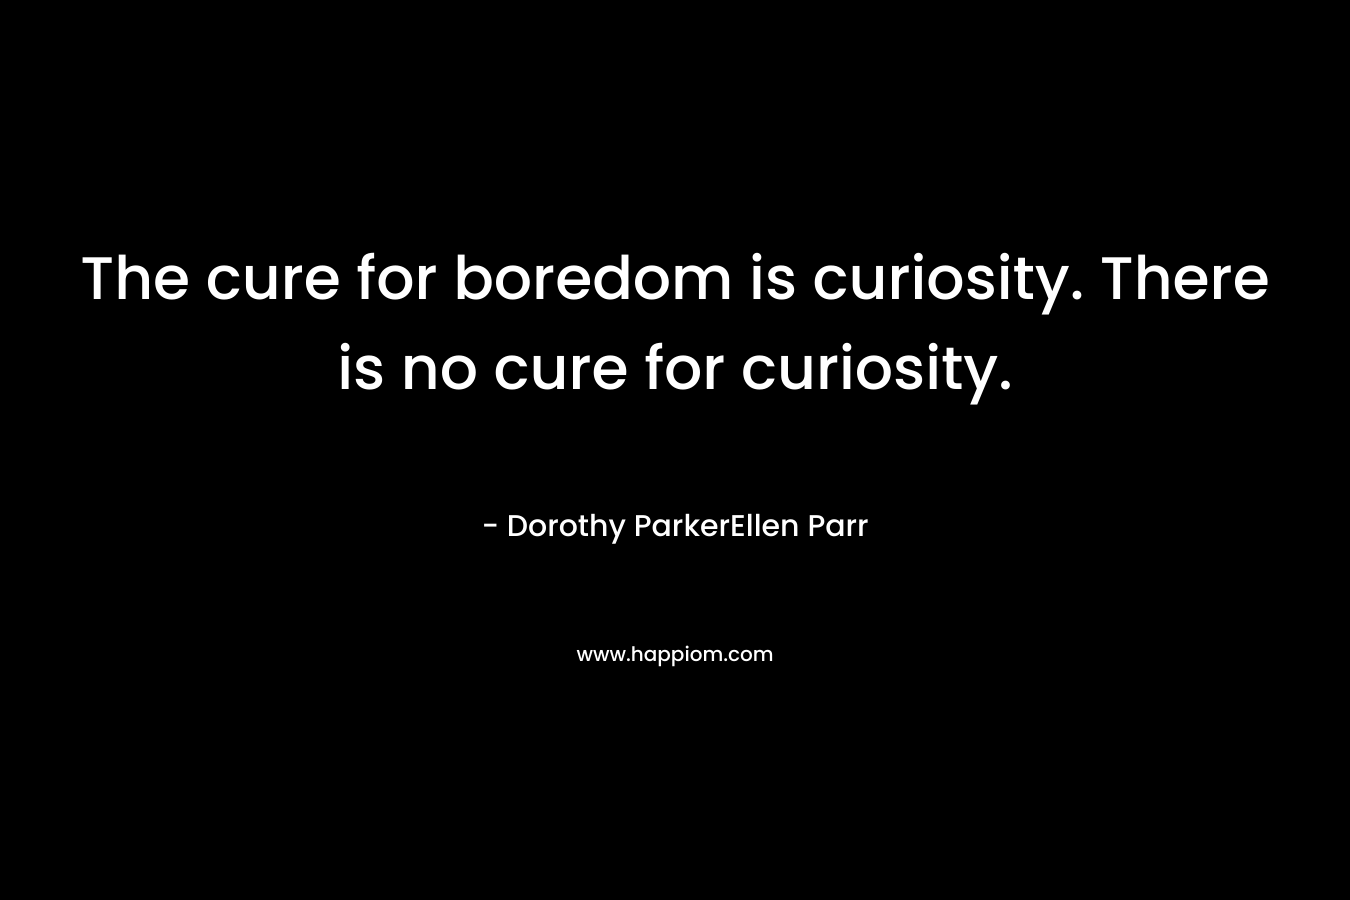 The cure for boredom is curiosity. There is no cure for curiosity. – Dorothy ParkerEllen Parr